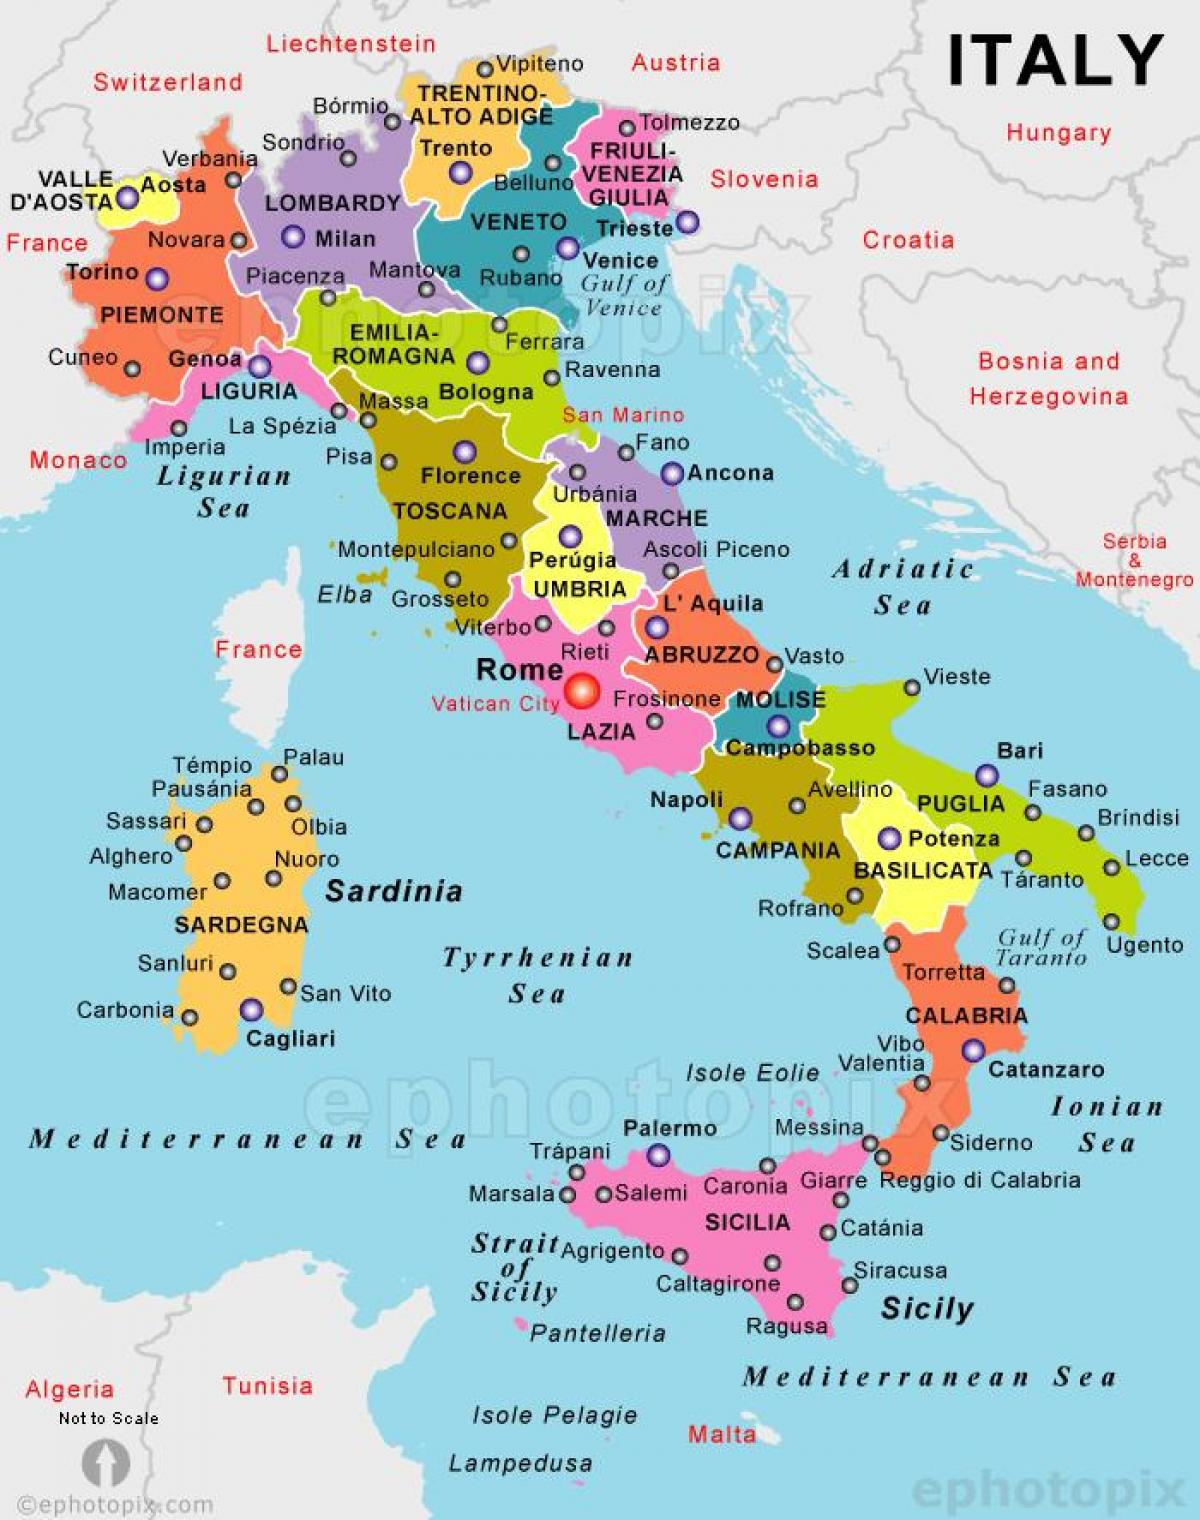 where is Italy on the map